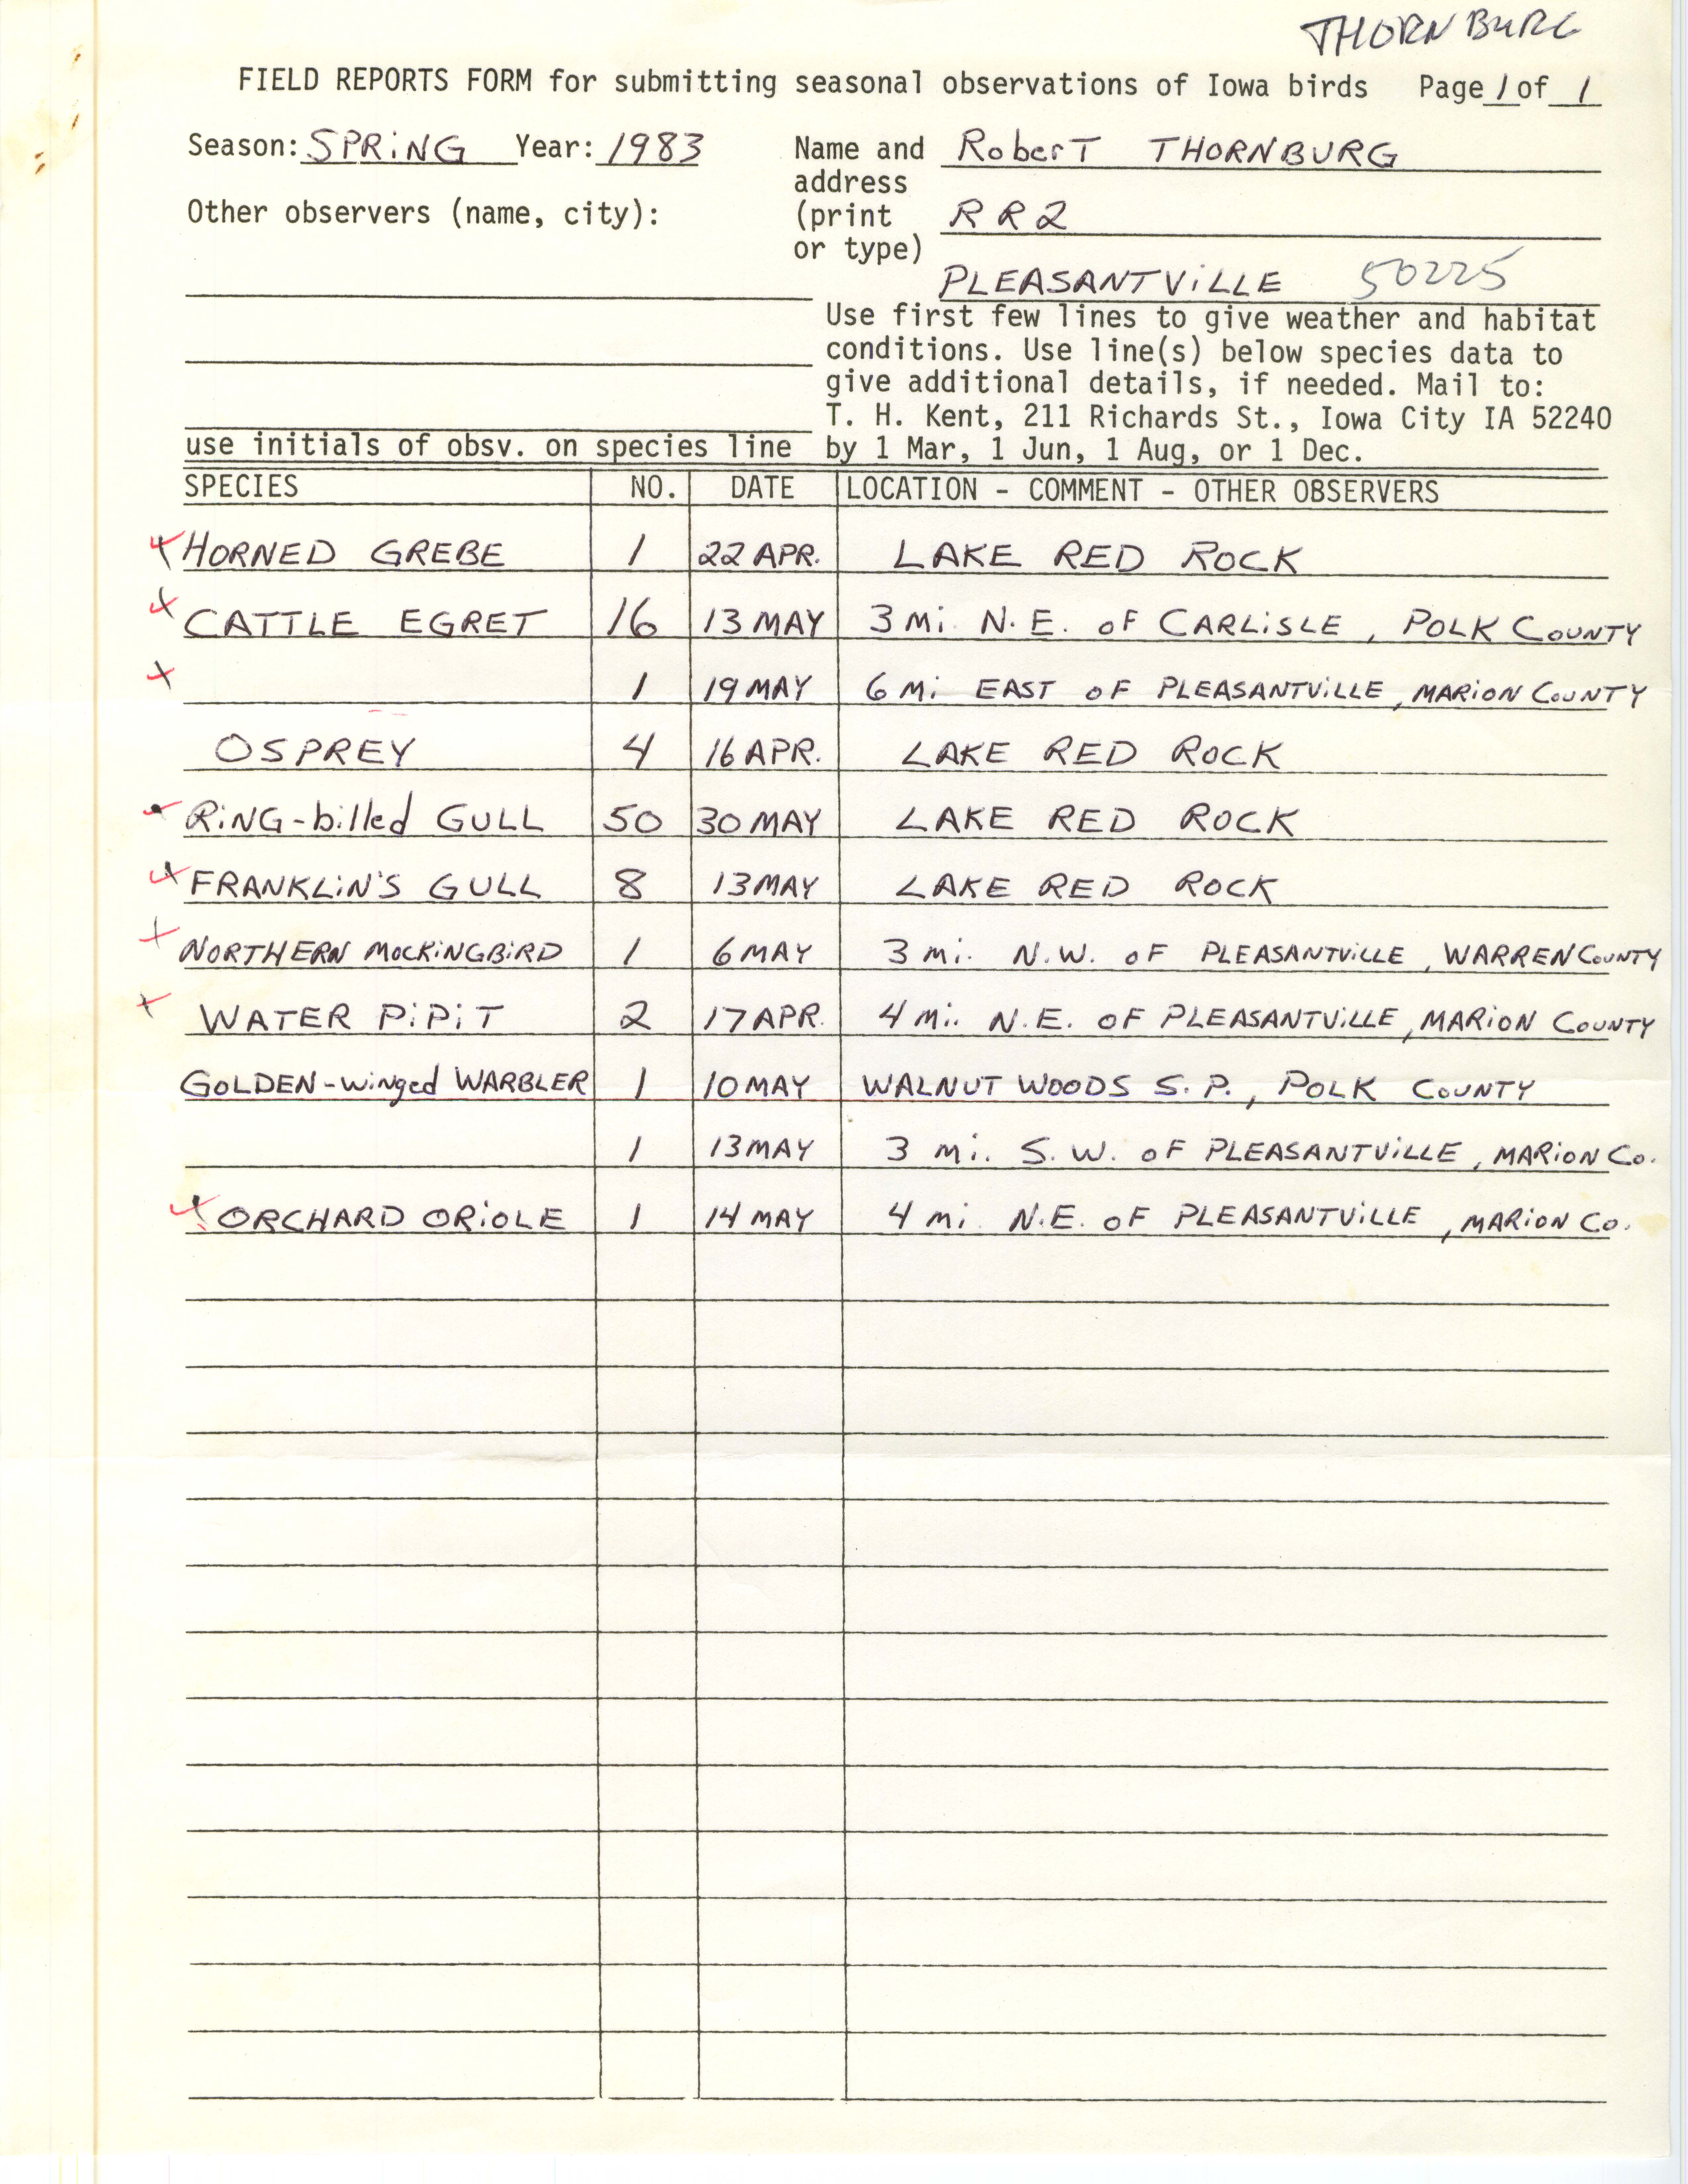 Field reports form for submitting seasonal observations of Iowa birds, Robert E. Thornburg, spring 1983